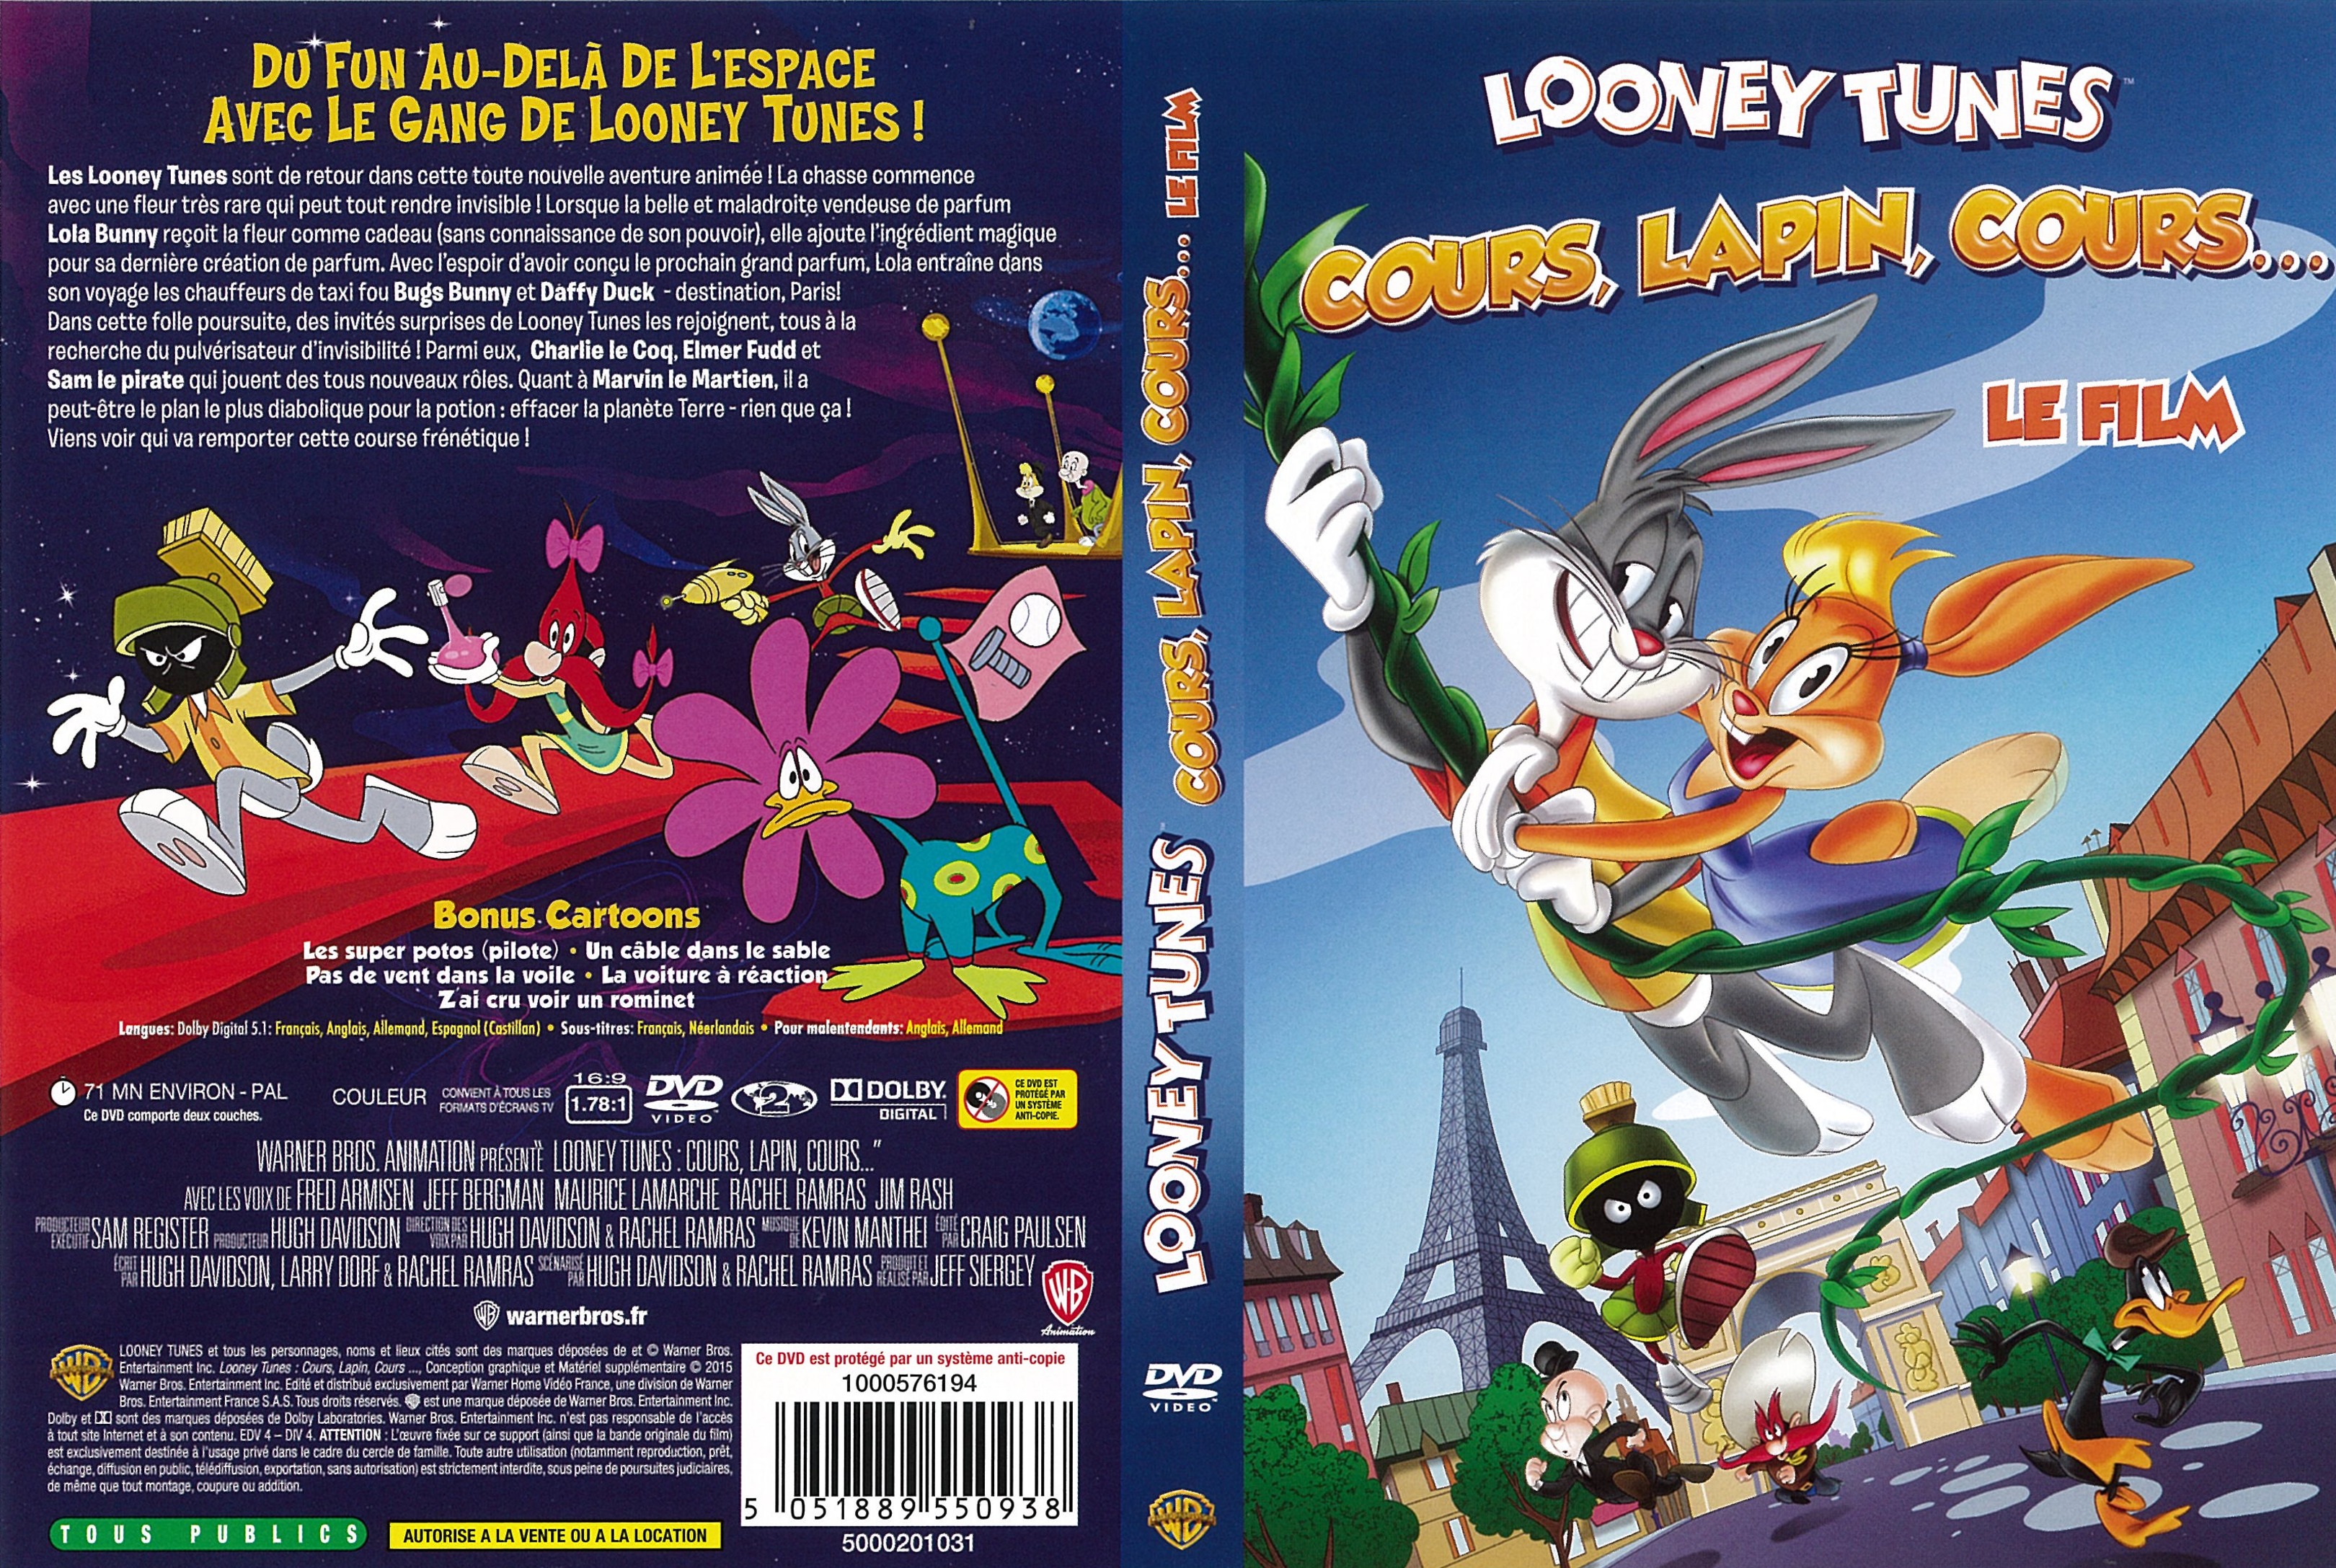 Jaquette DVD Looney Tunes - Cours, lapin, cours